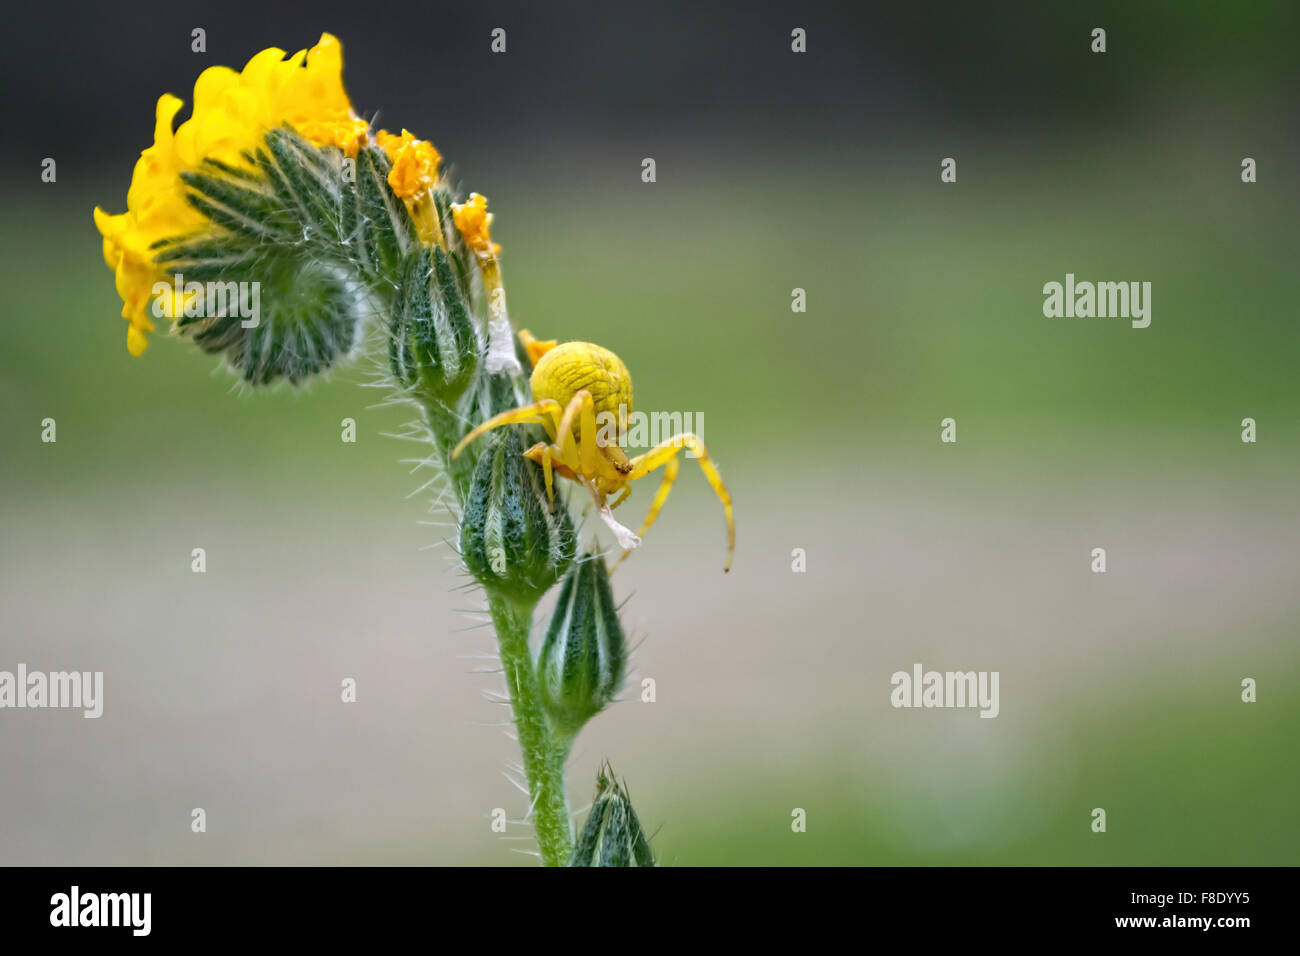 A yellow crab spider on Amsinckia menziesii, yellow spiral flower bouquet  on green background Stock Photo